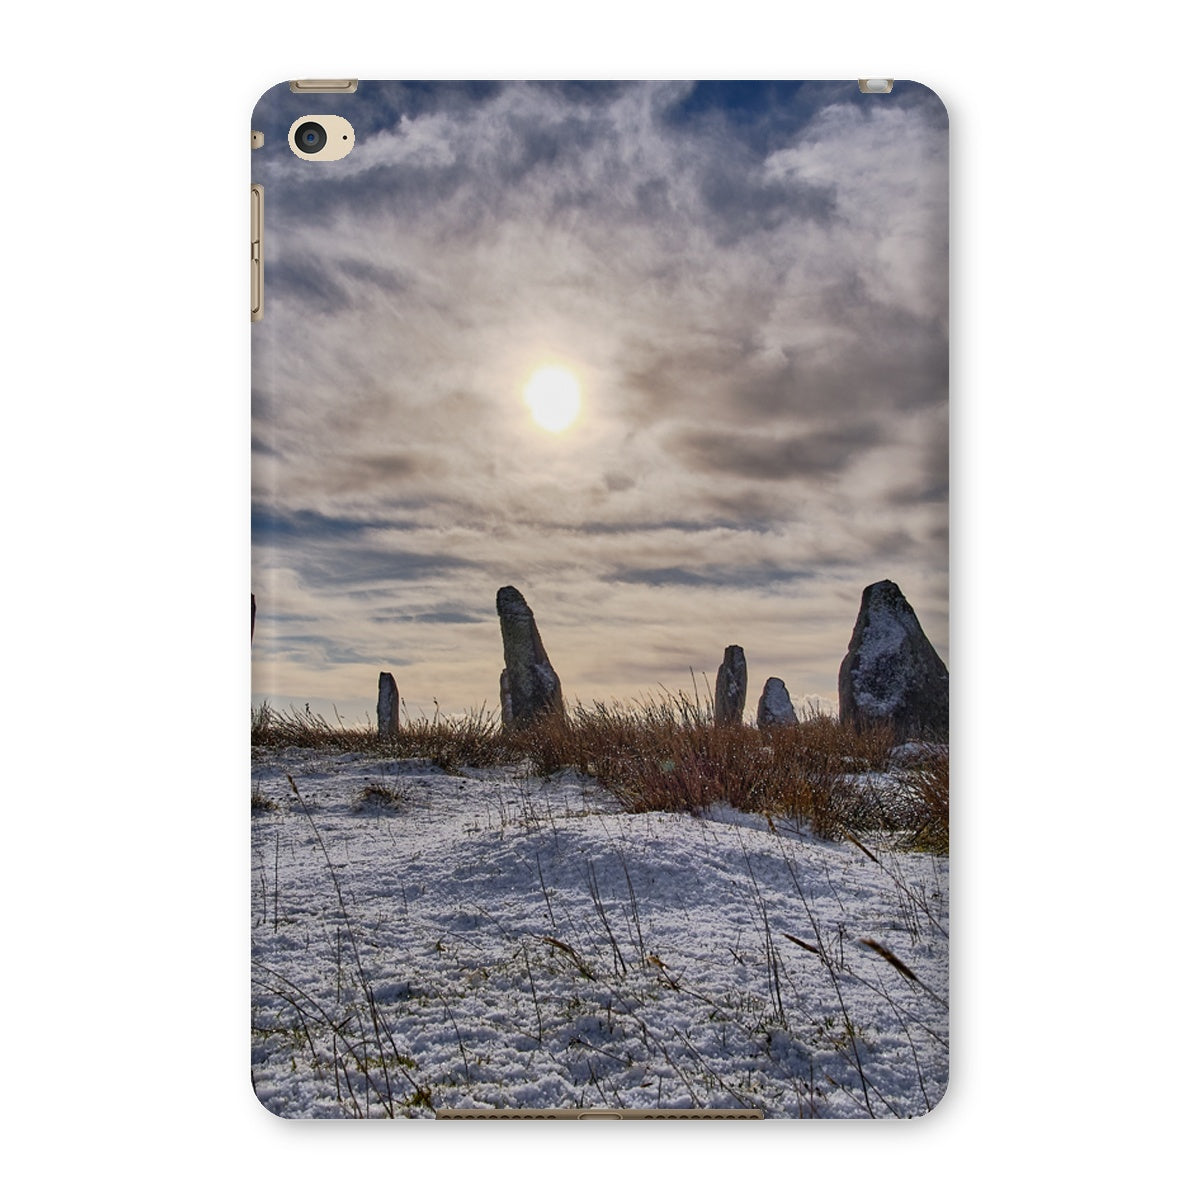 Cnoc Fillibhir Bheag/Callanish III in snow and sunshine Tablet Cases